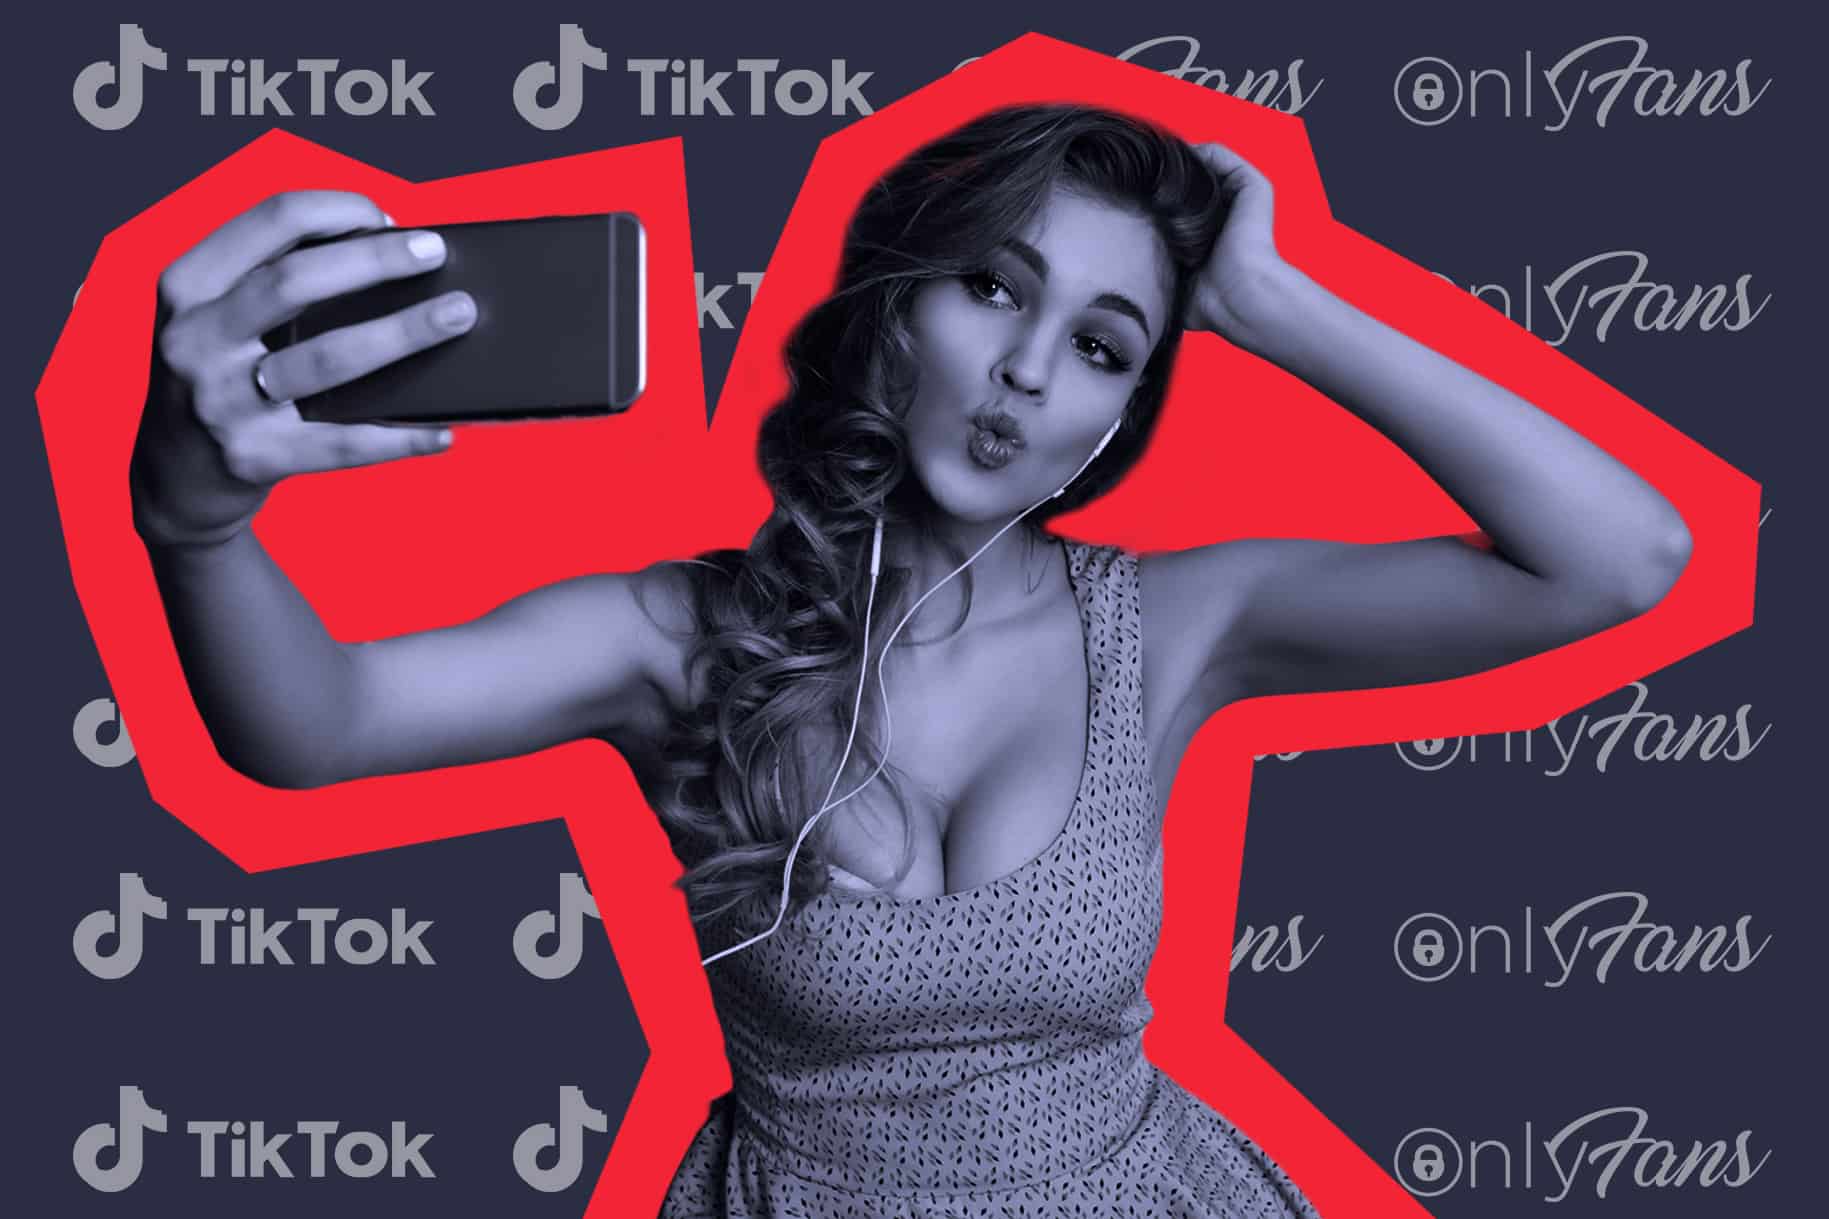 Hottest tiktokers with only fans